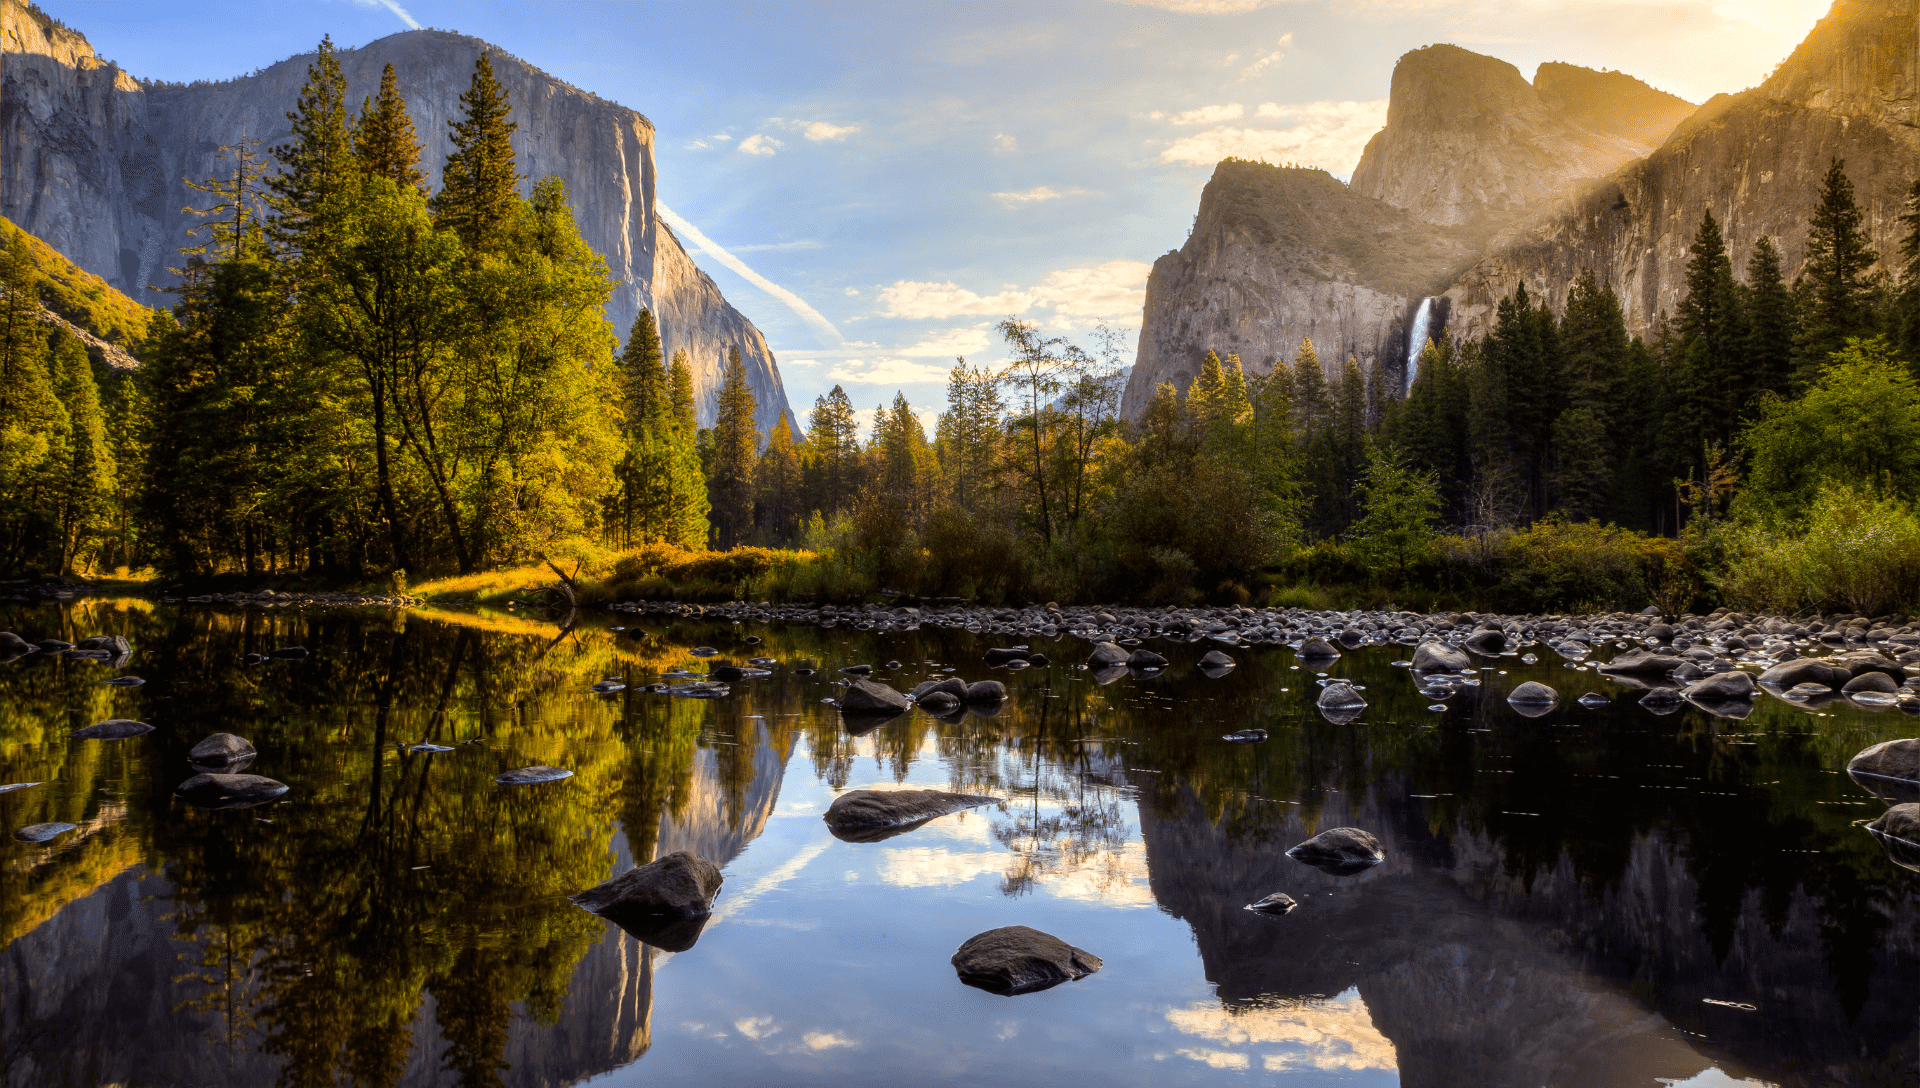 Yosemite Camping Reservations Secrets You Need To Know To Book A Site